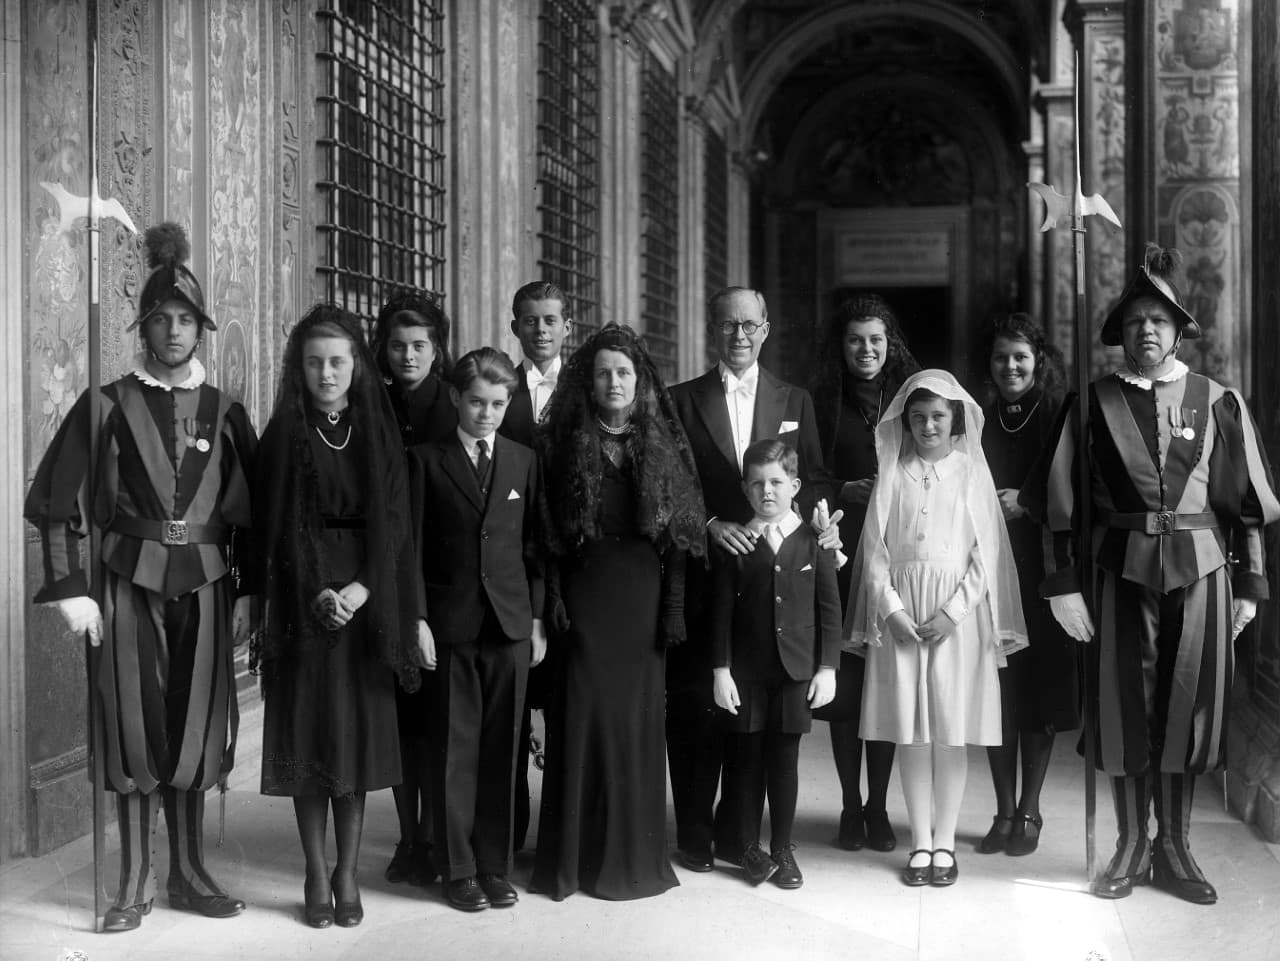 The Kennedy family at the Vatican after the Coronation of Pope Pius XII, March 12, 1939. (Courtesy John F. Kennedy Presidential Library)